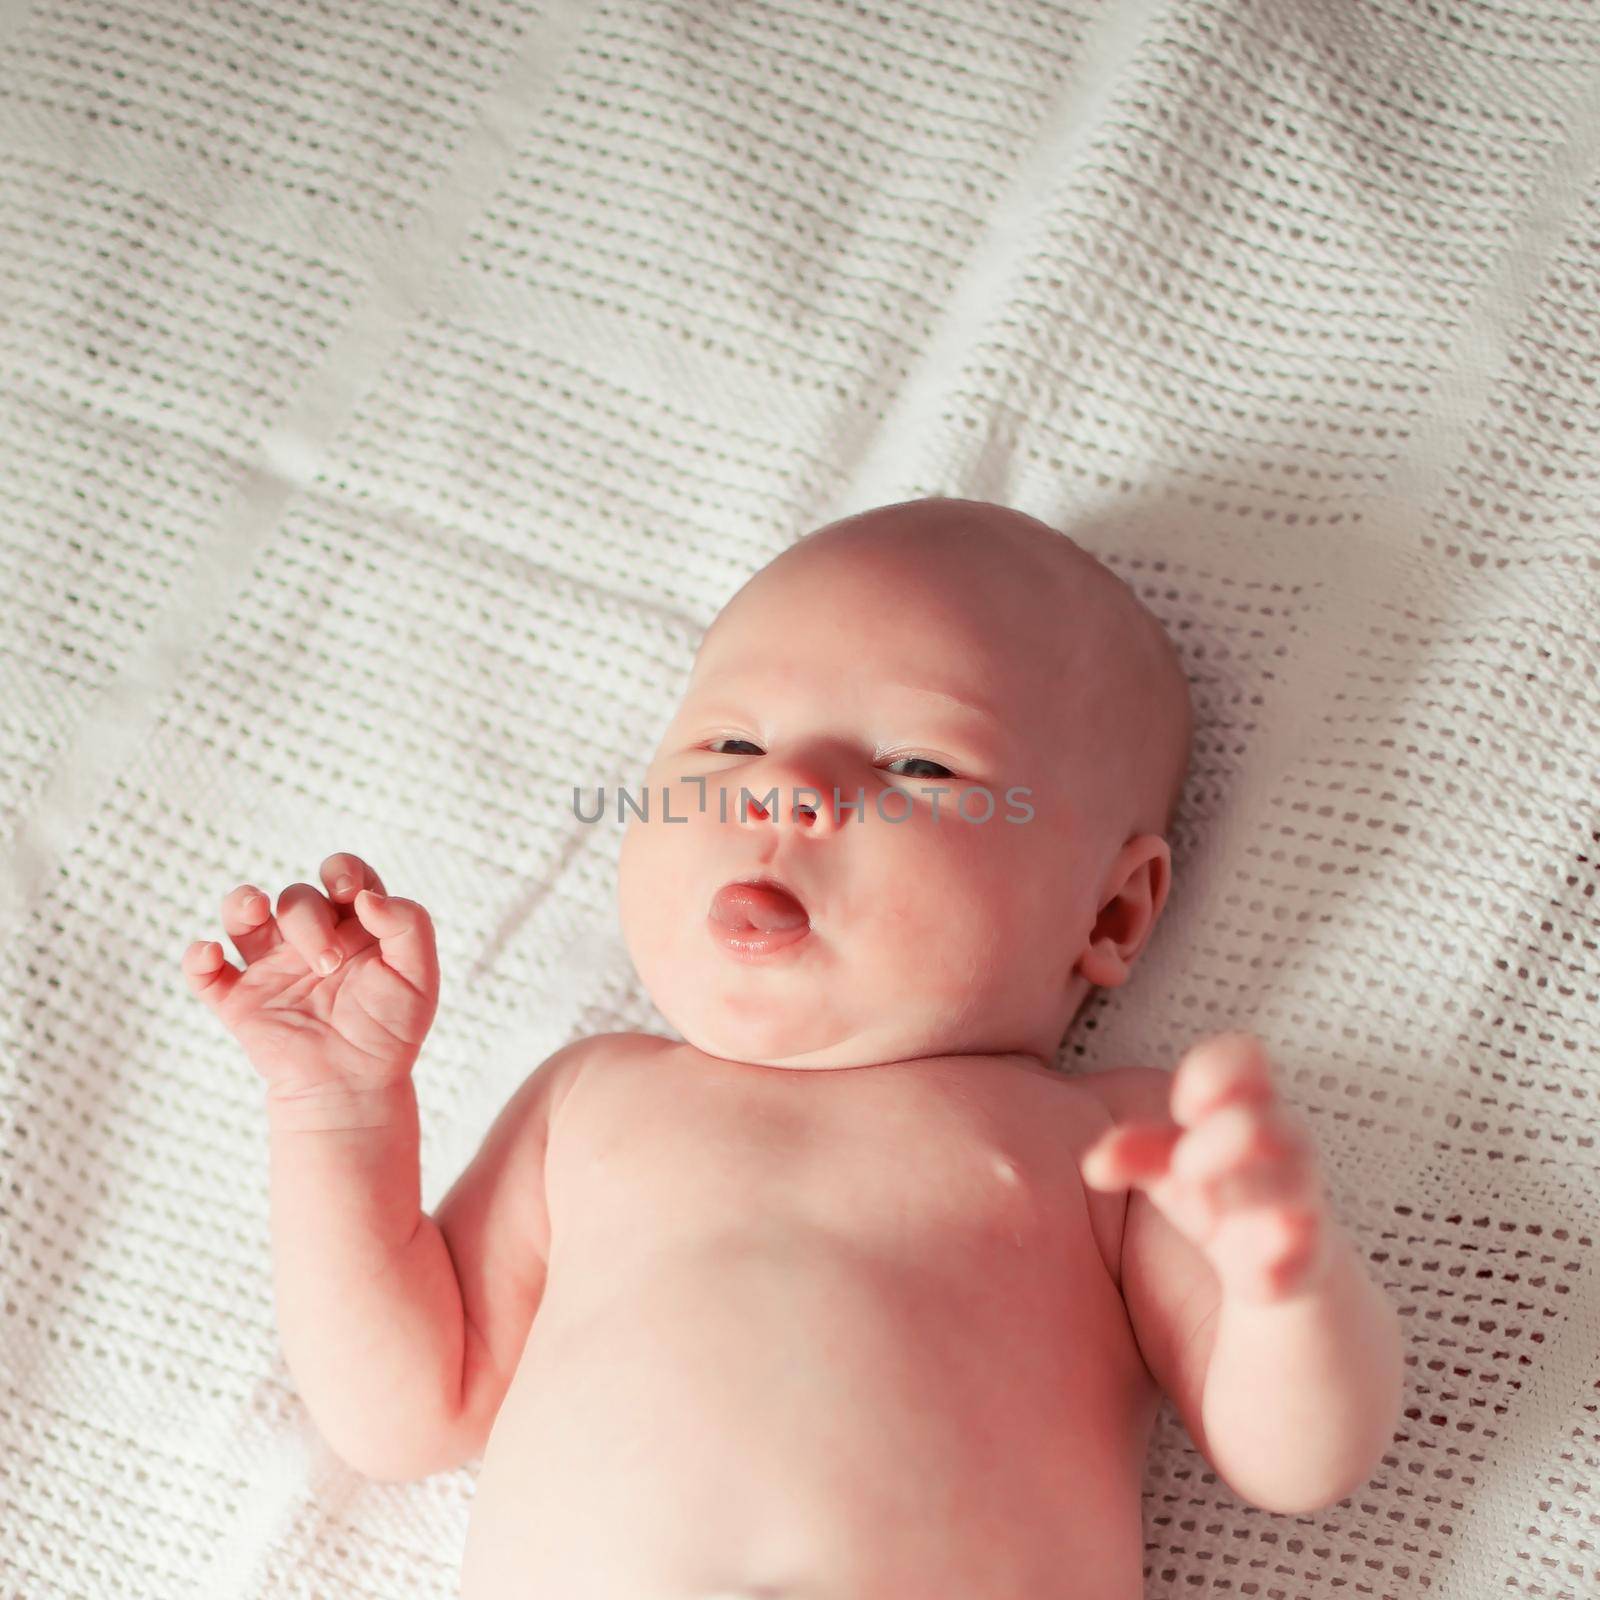 close up. a pretty newborn baby lying on a towel. photo with copy space